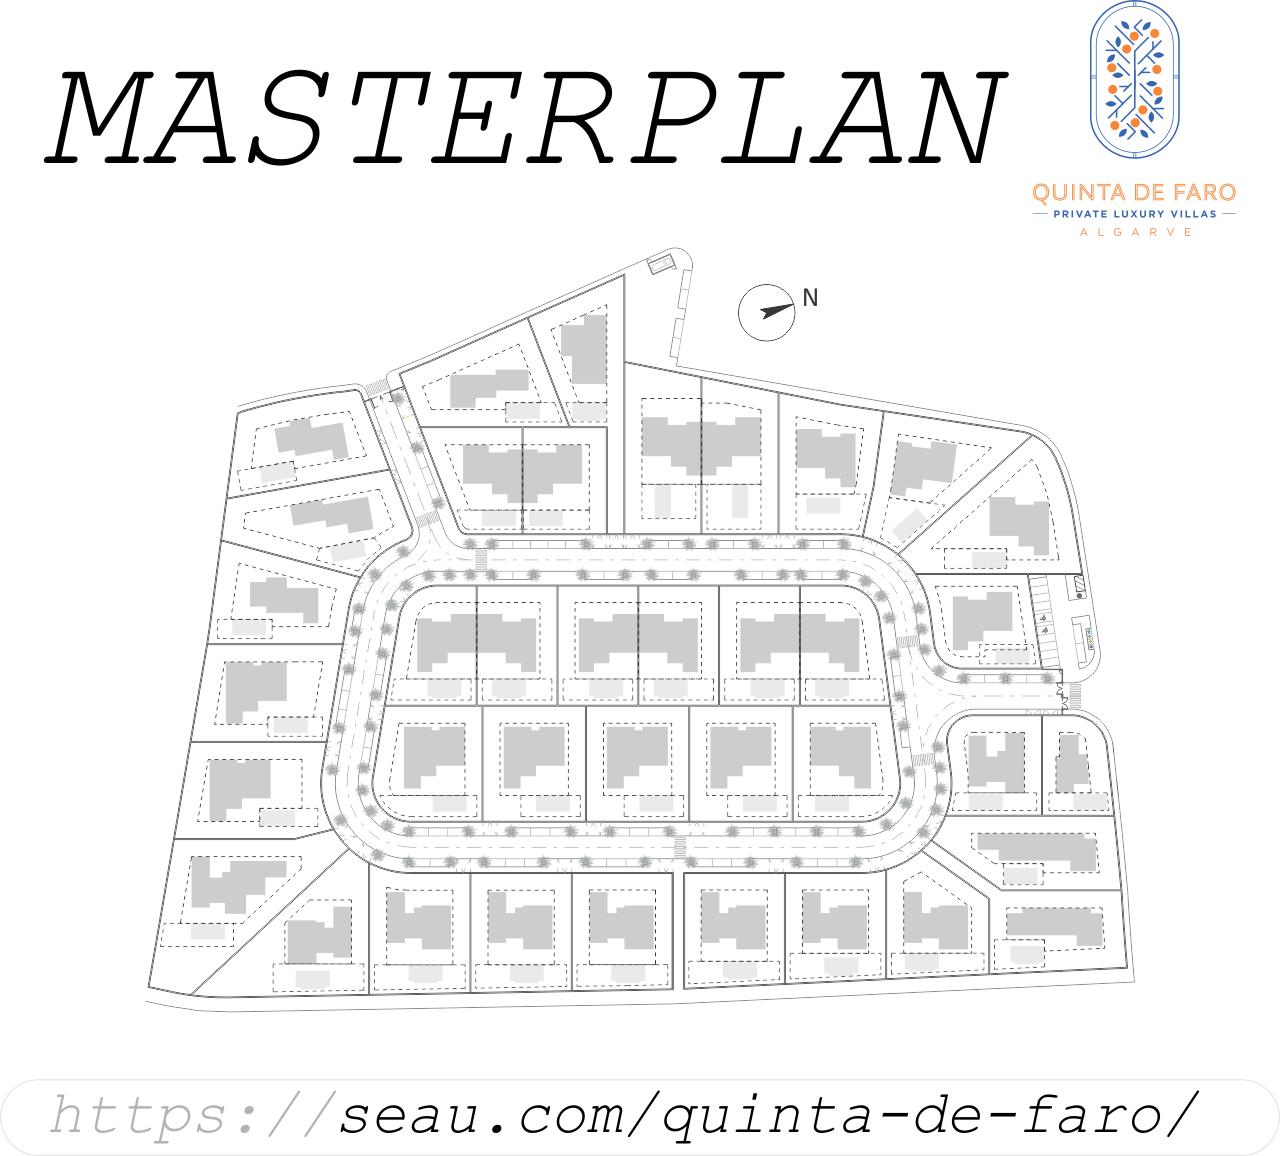 Quinta de Faro Masterplan. To see more about the areas of the various lots and different types of villas, click here